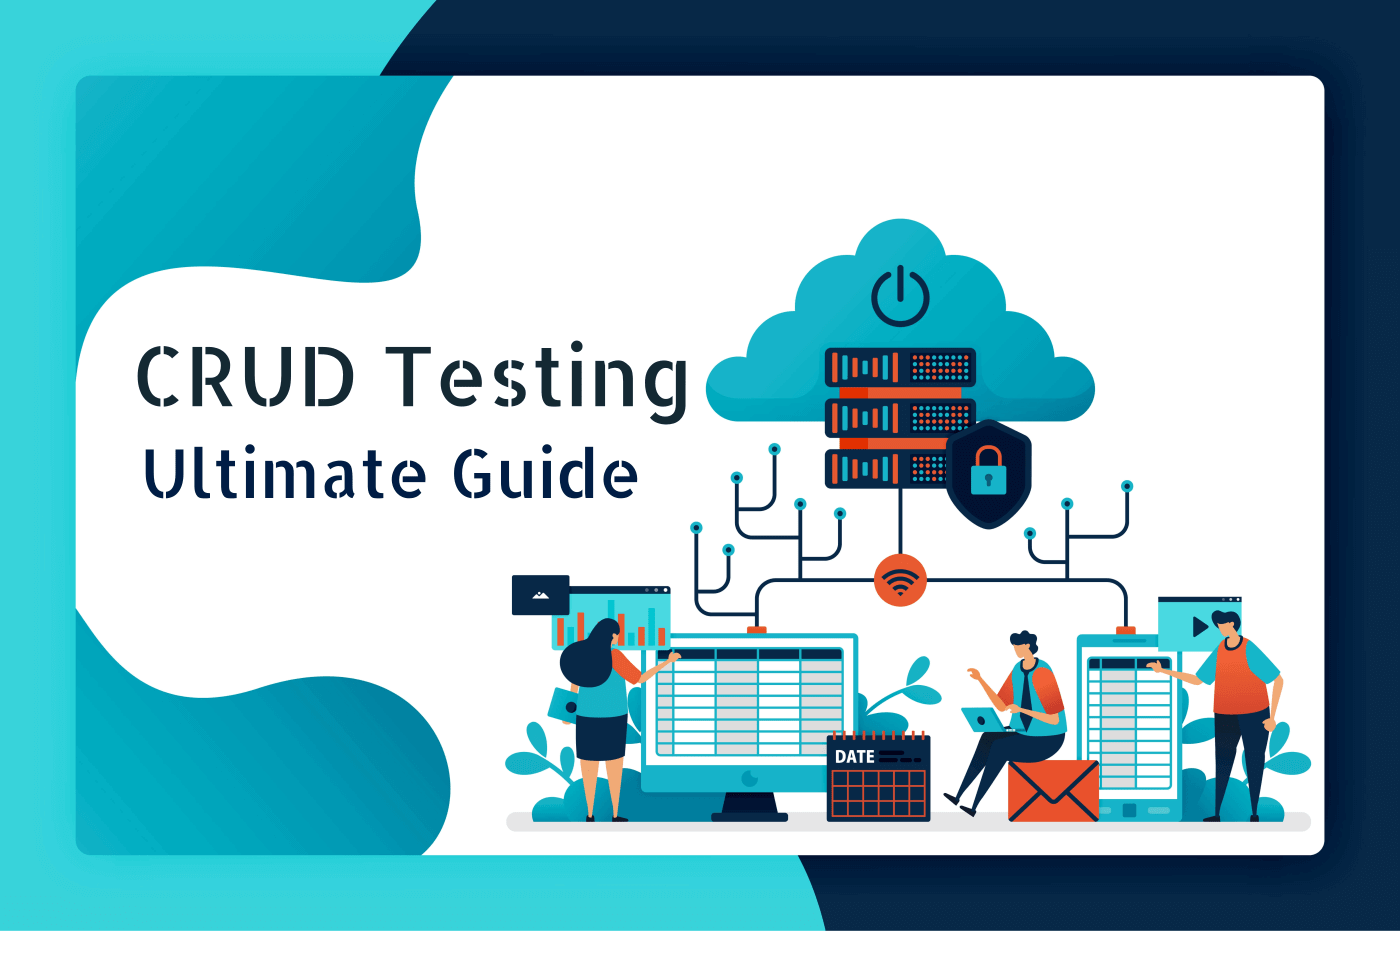 The Ultimate Guide to CRUD Testing